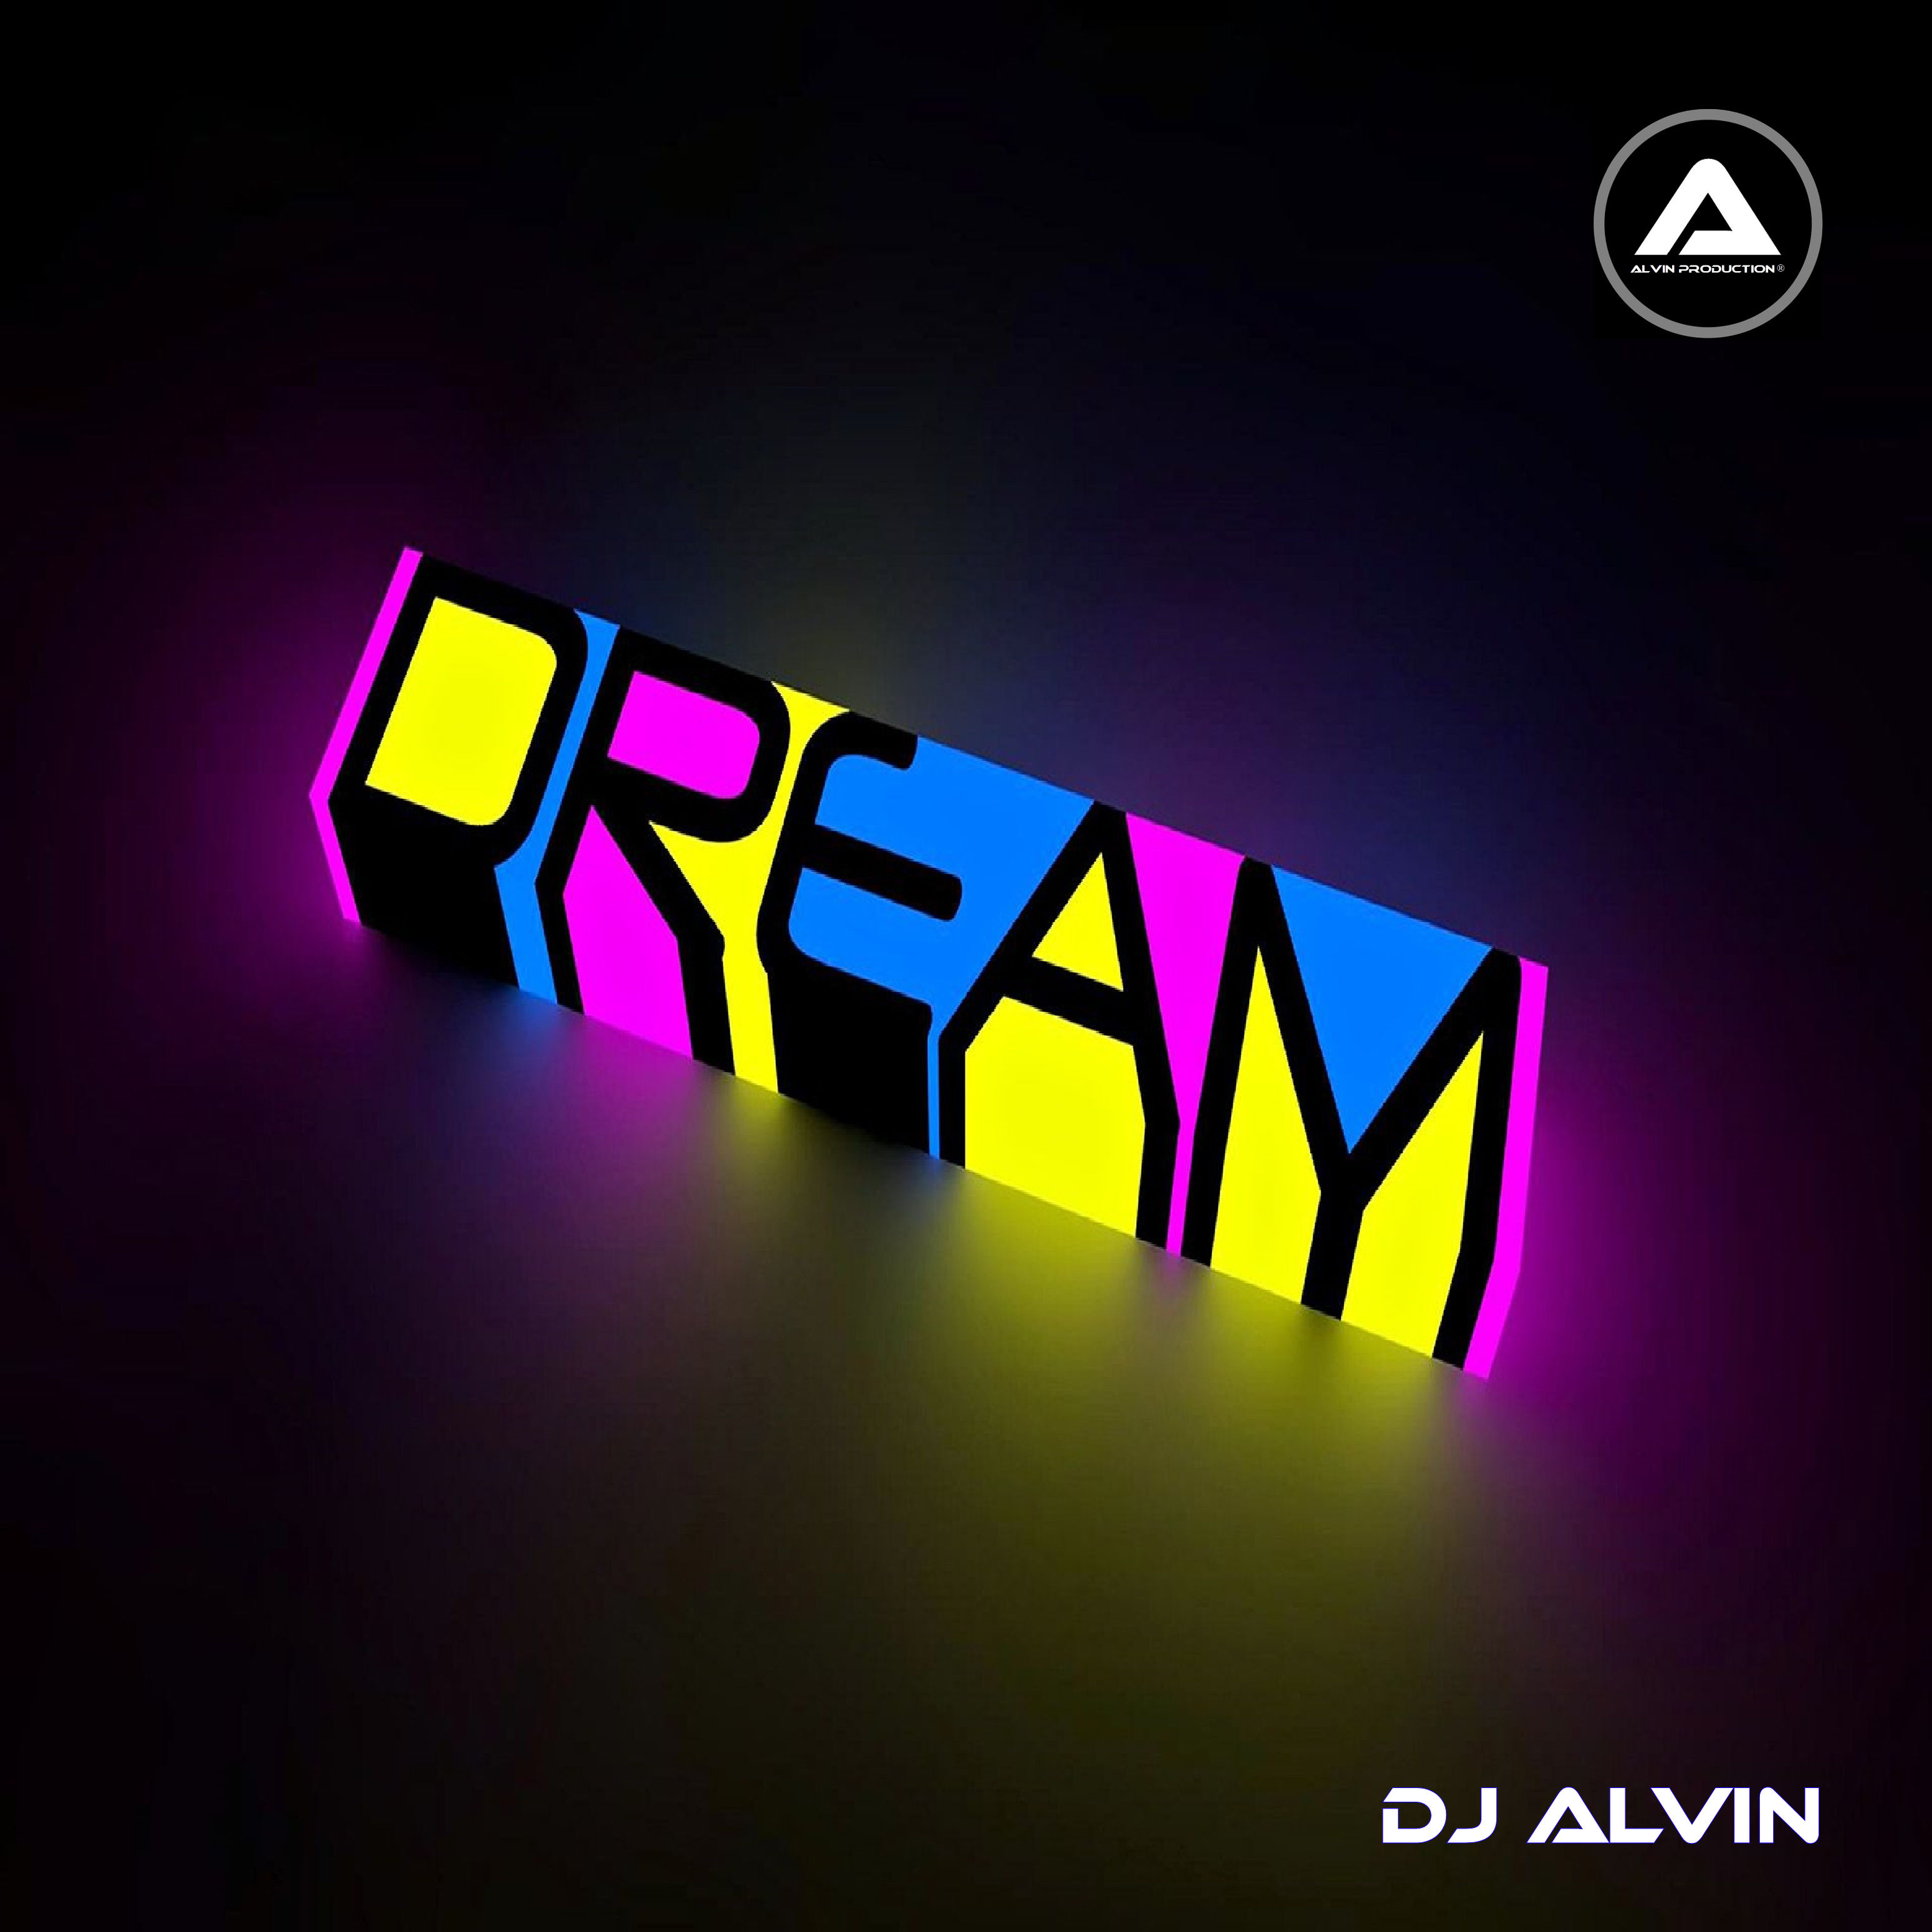 Dream (Extended Mix)